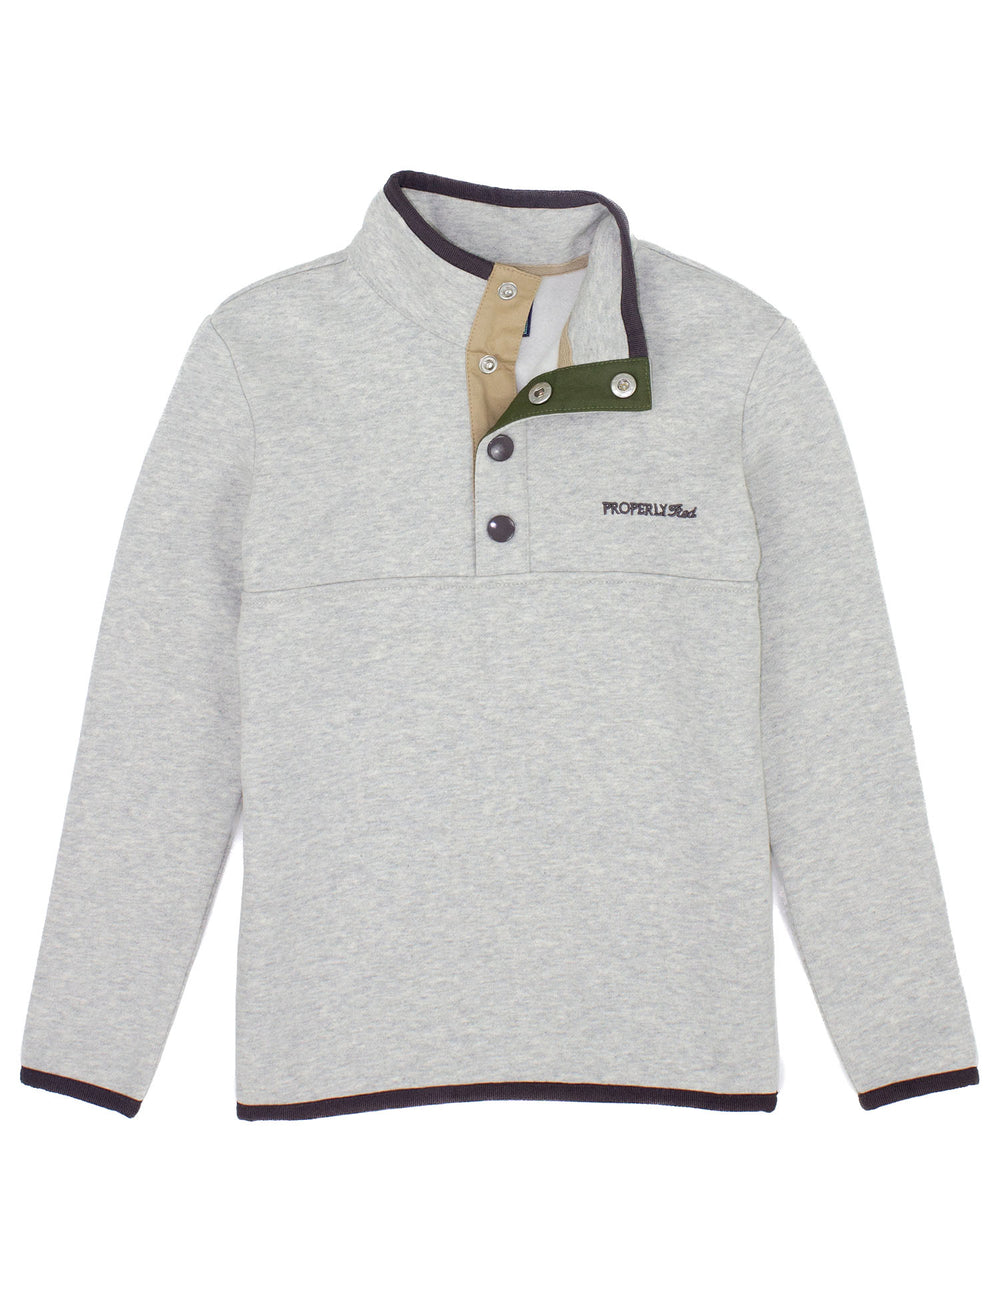 Properly Tied-Grey Carter Pullover